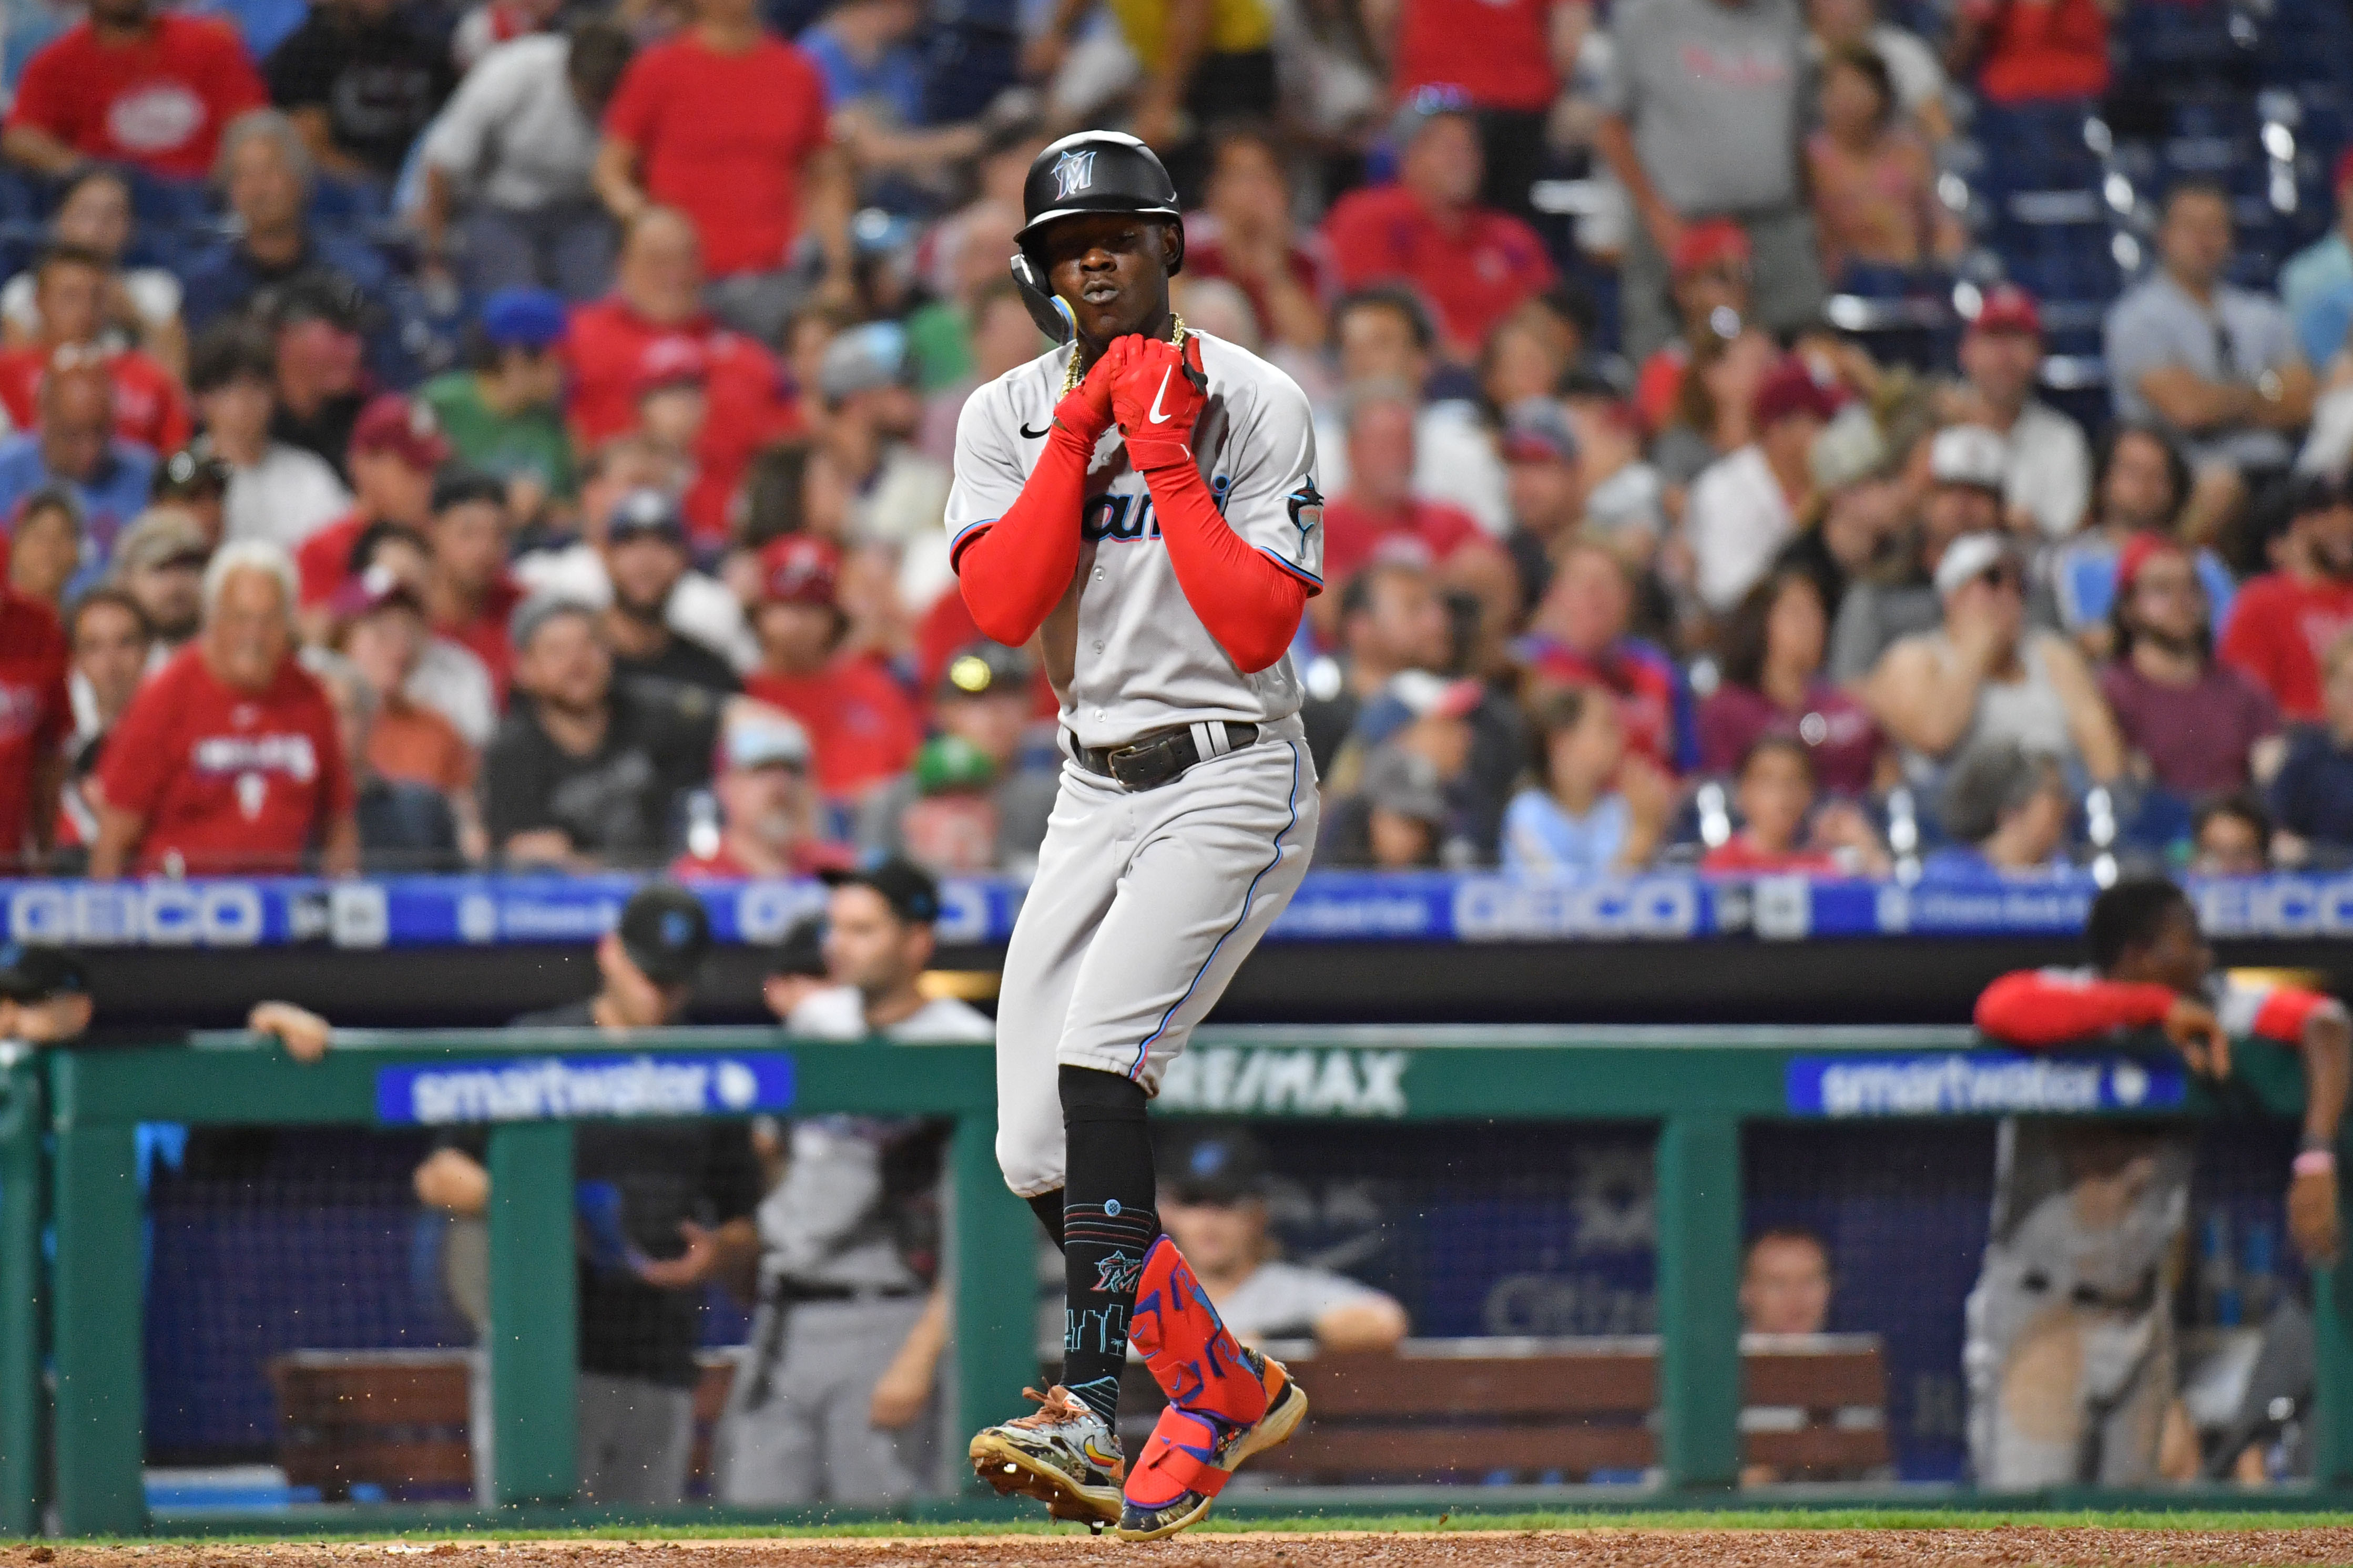 Miami Marlins second baseman Jazz Chisholm Jr. (2) celebrates his solo home run against the Philadelphia Phillies during the seventh inning at Citizens Bank Park.